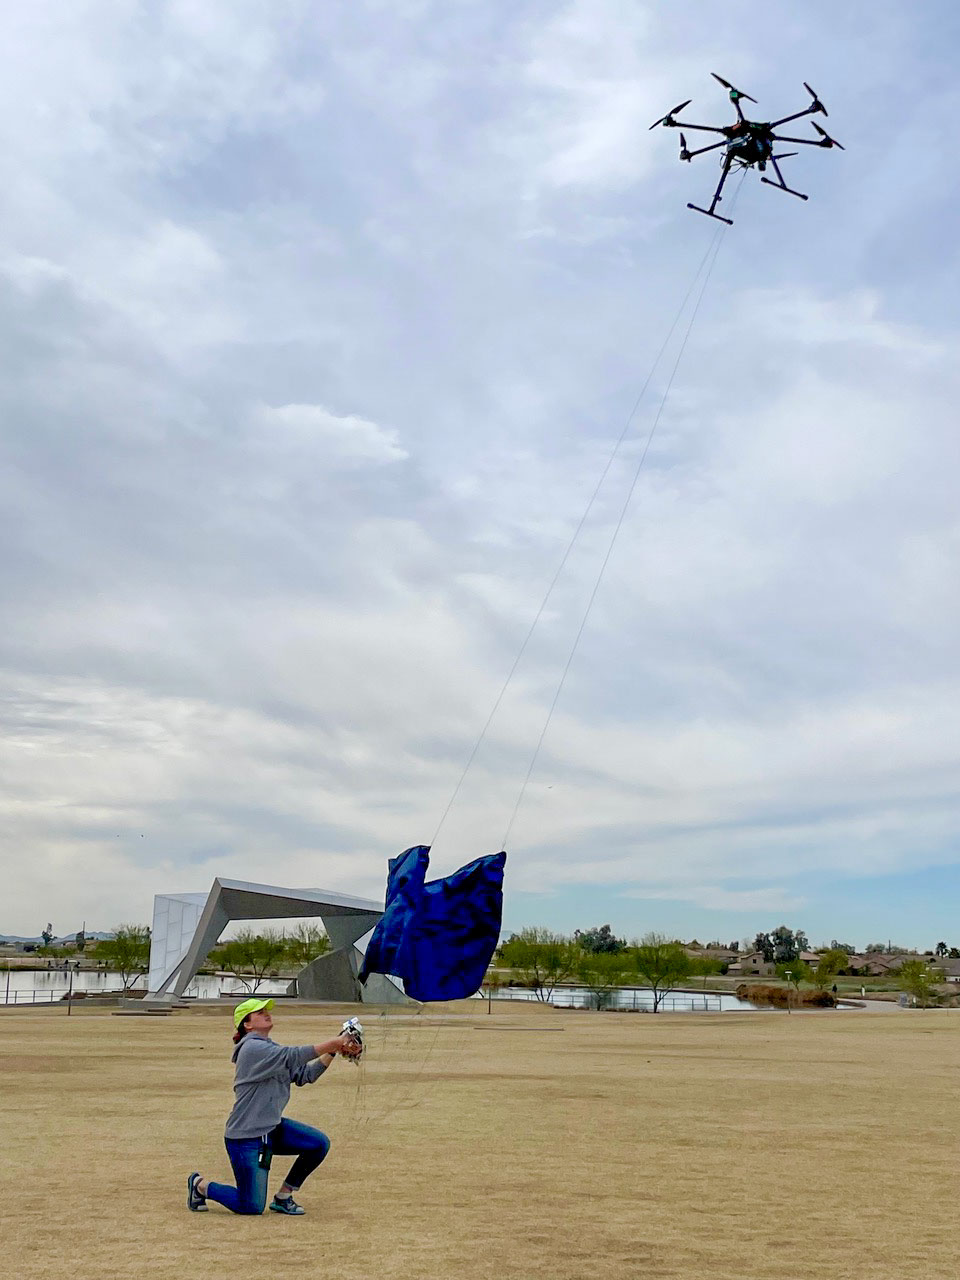 A woman on the ground interacts with a large drone in the sky, testing a drone-driven parachute deployment system.